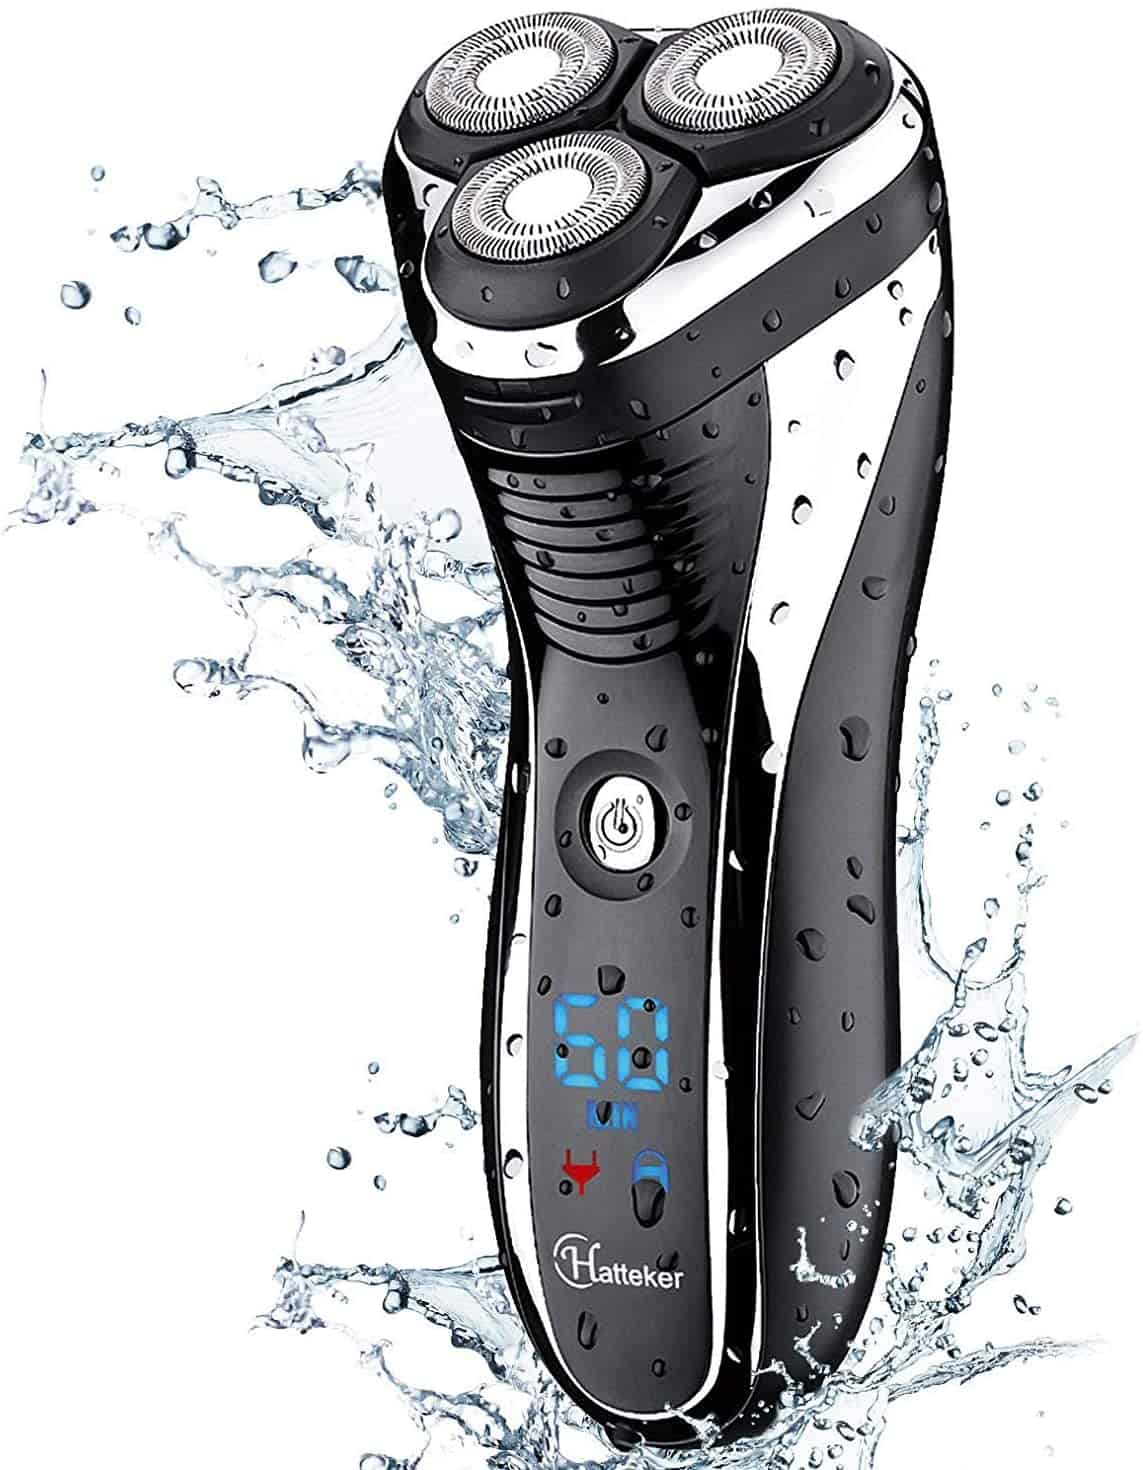 Electric Shaver - gifts for teen boys